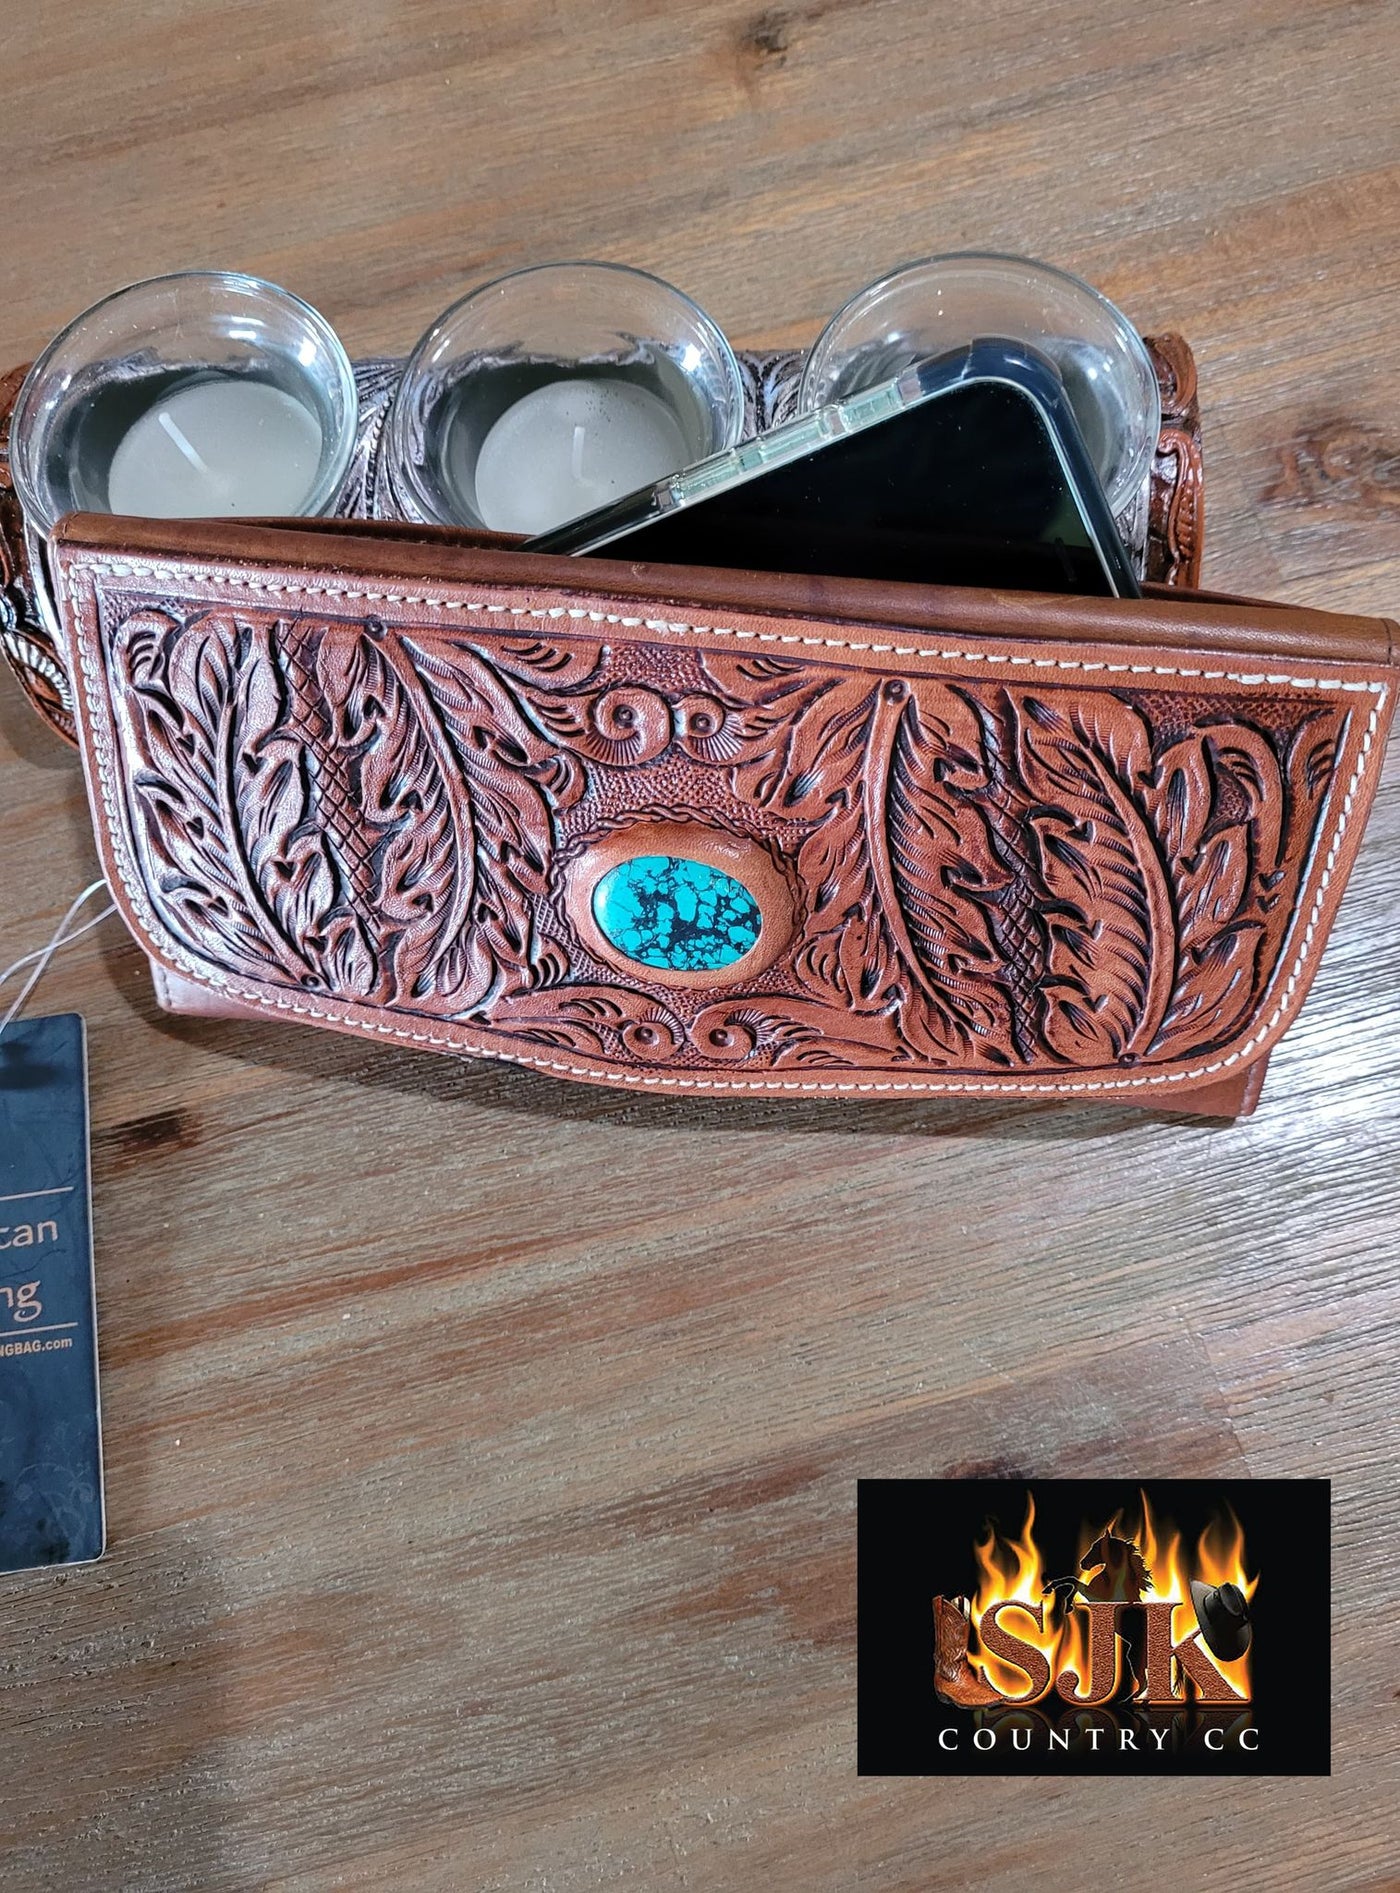 American Darling Leather Tooled Wallet